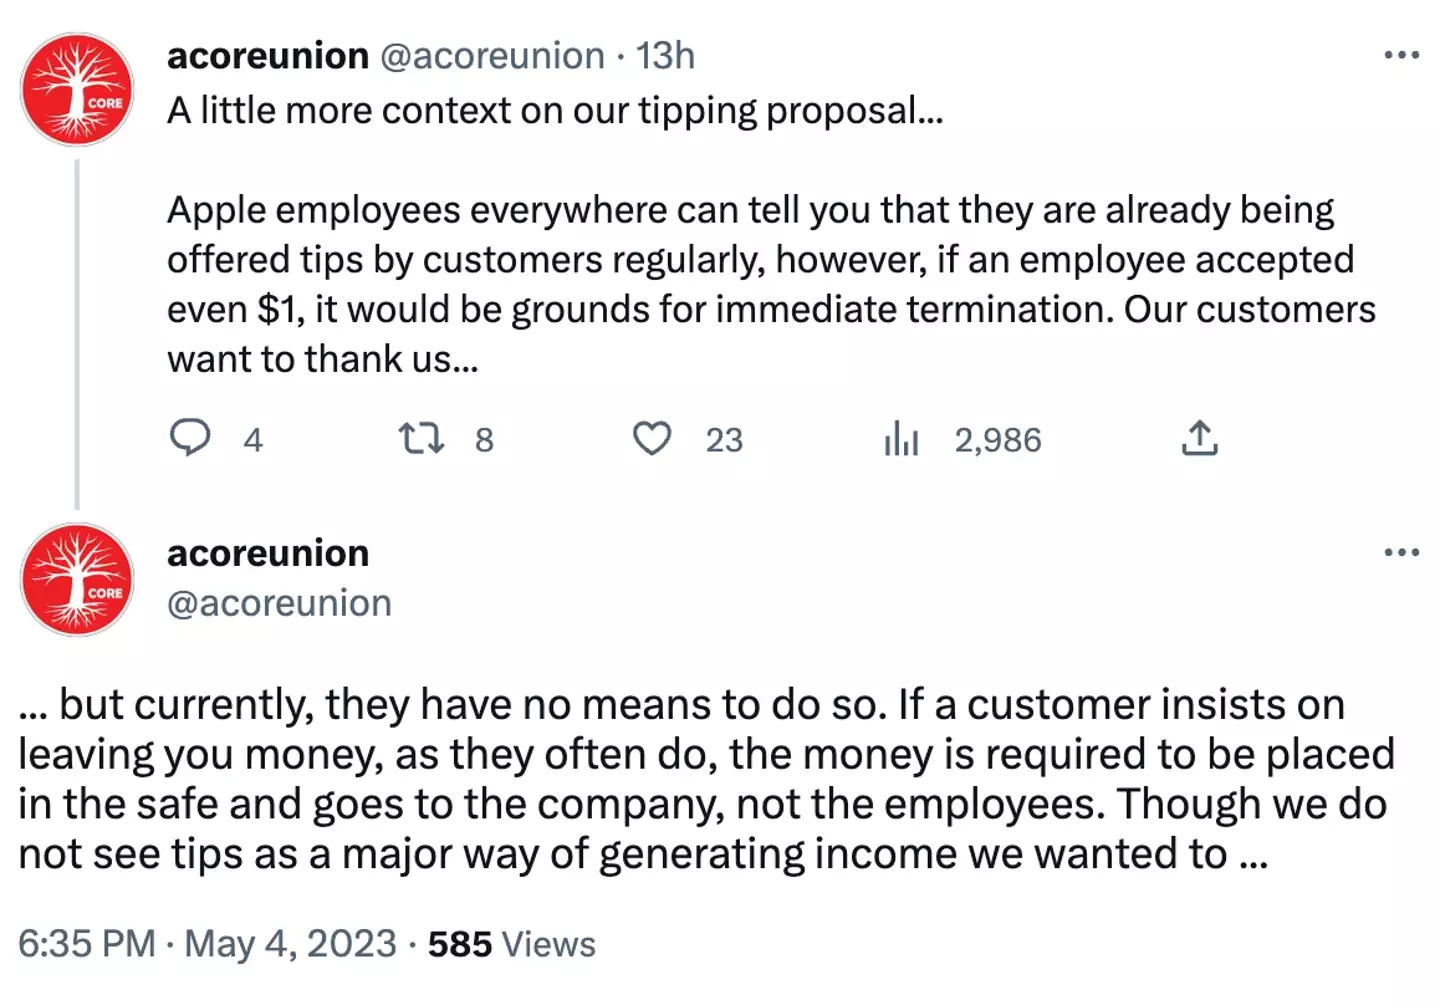 CORE has claimed customers already want to tip staff.